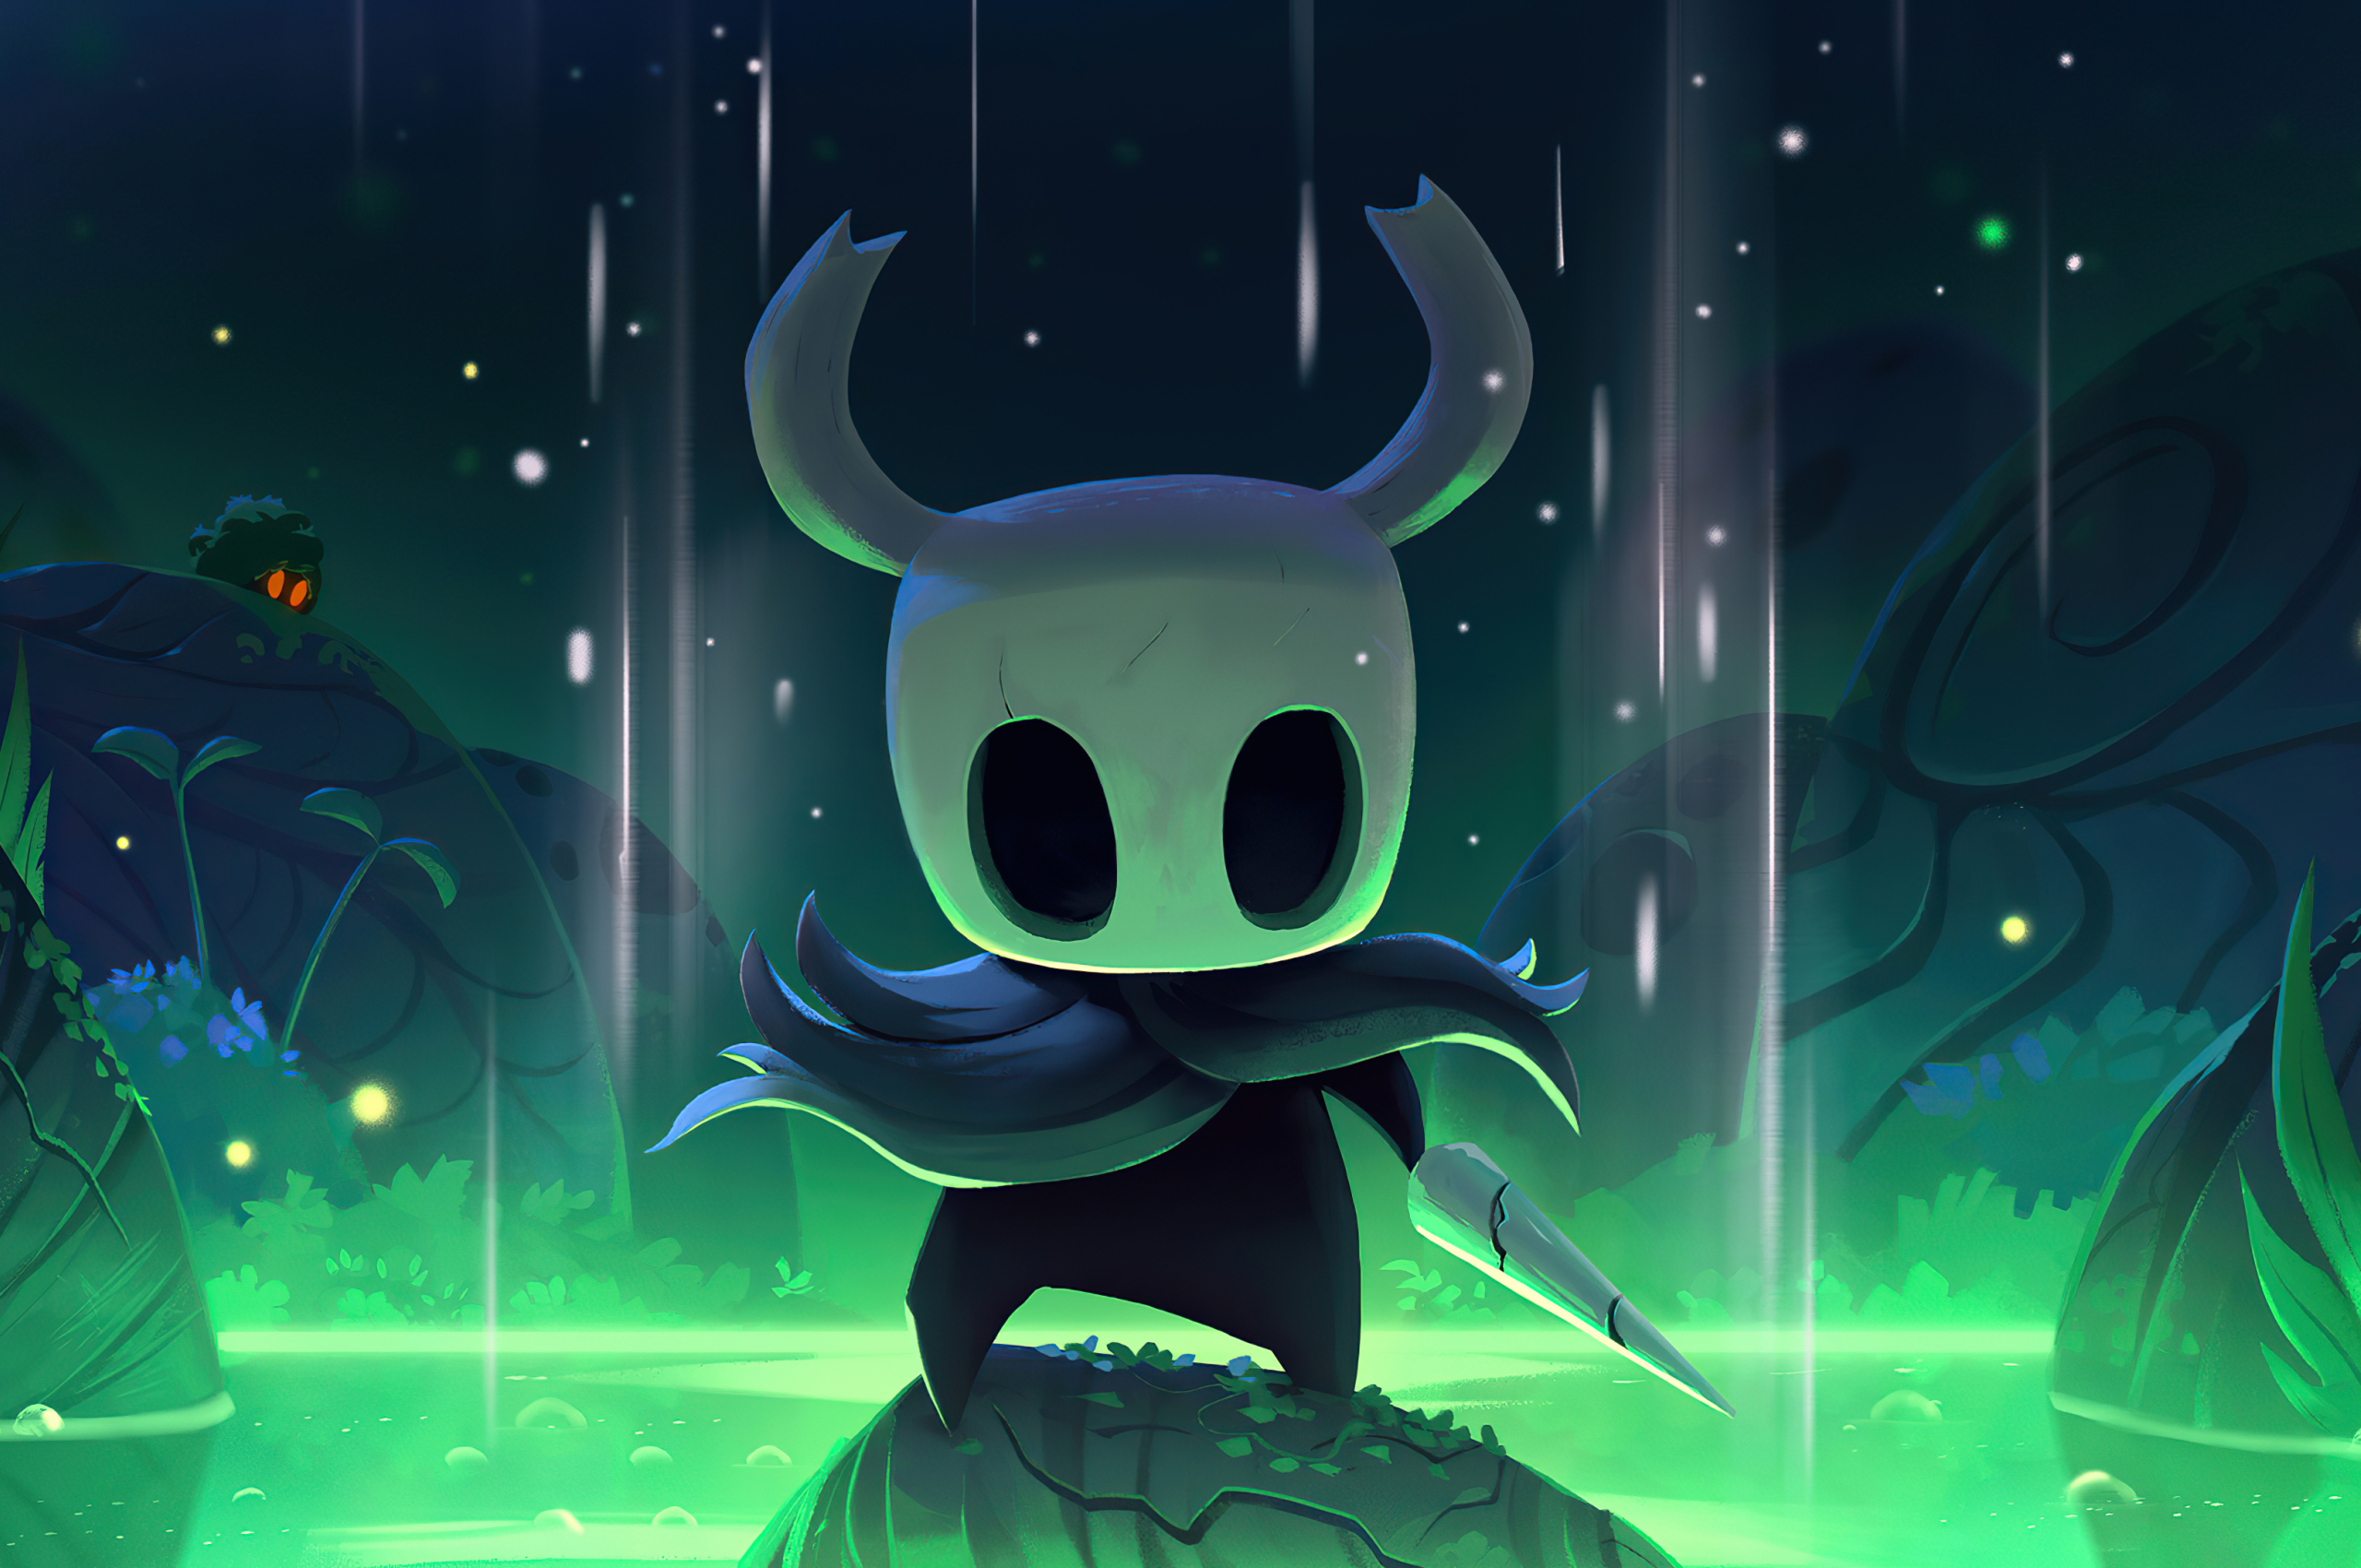 hollow knight apk download